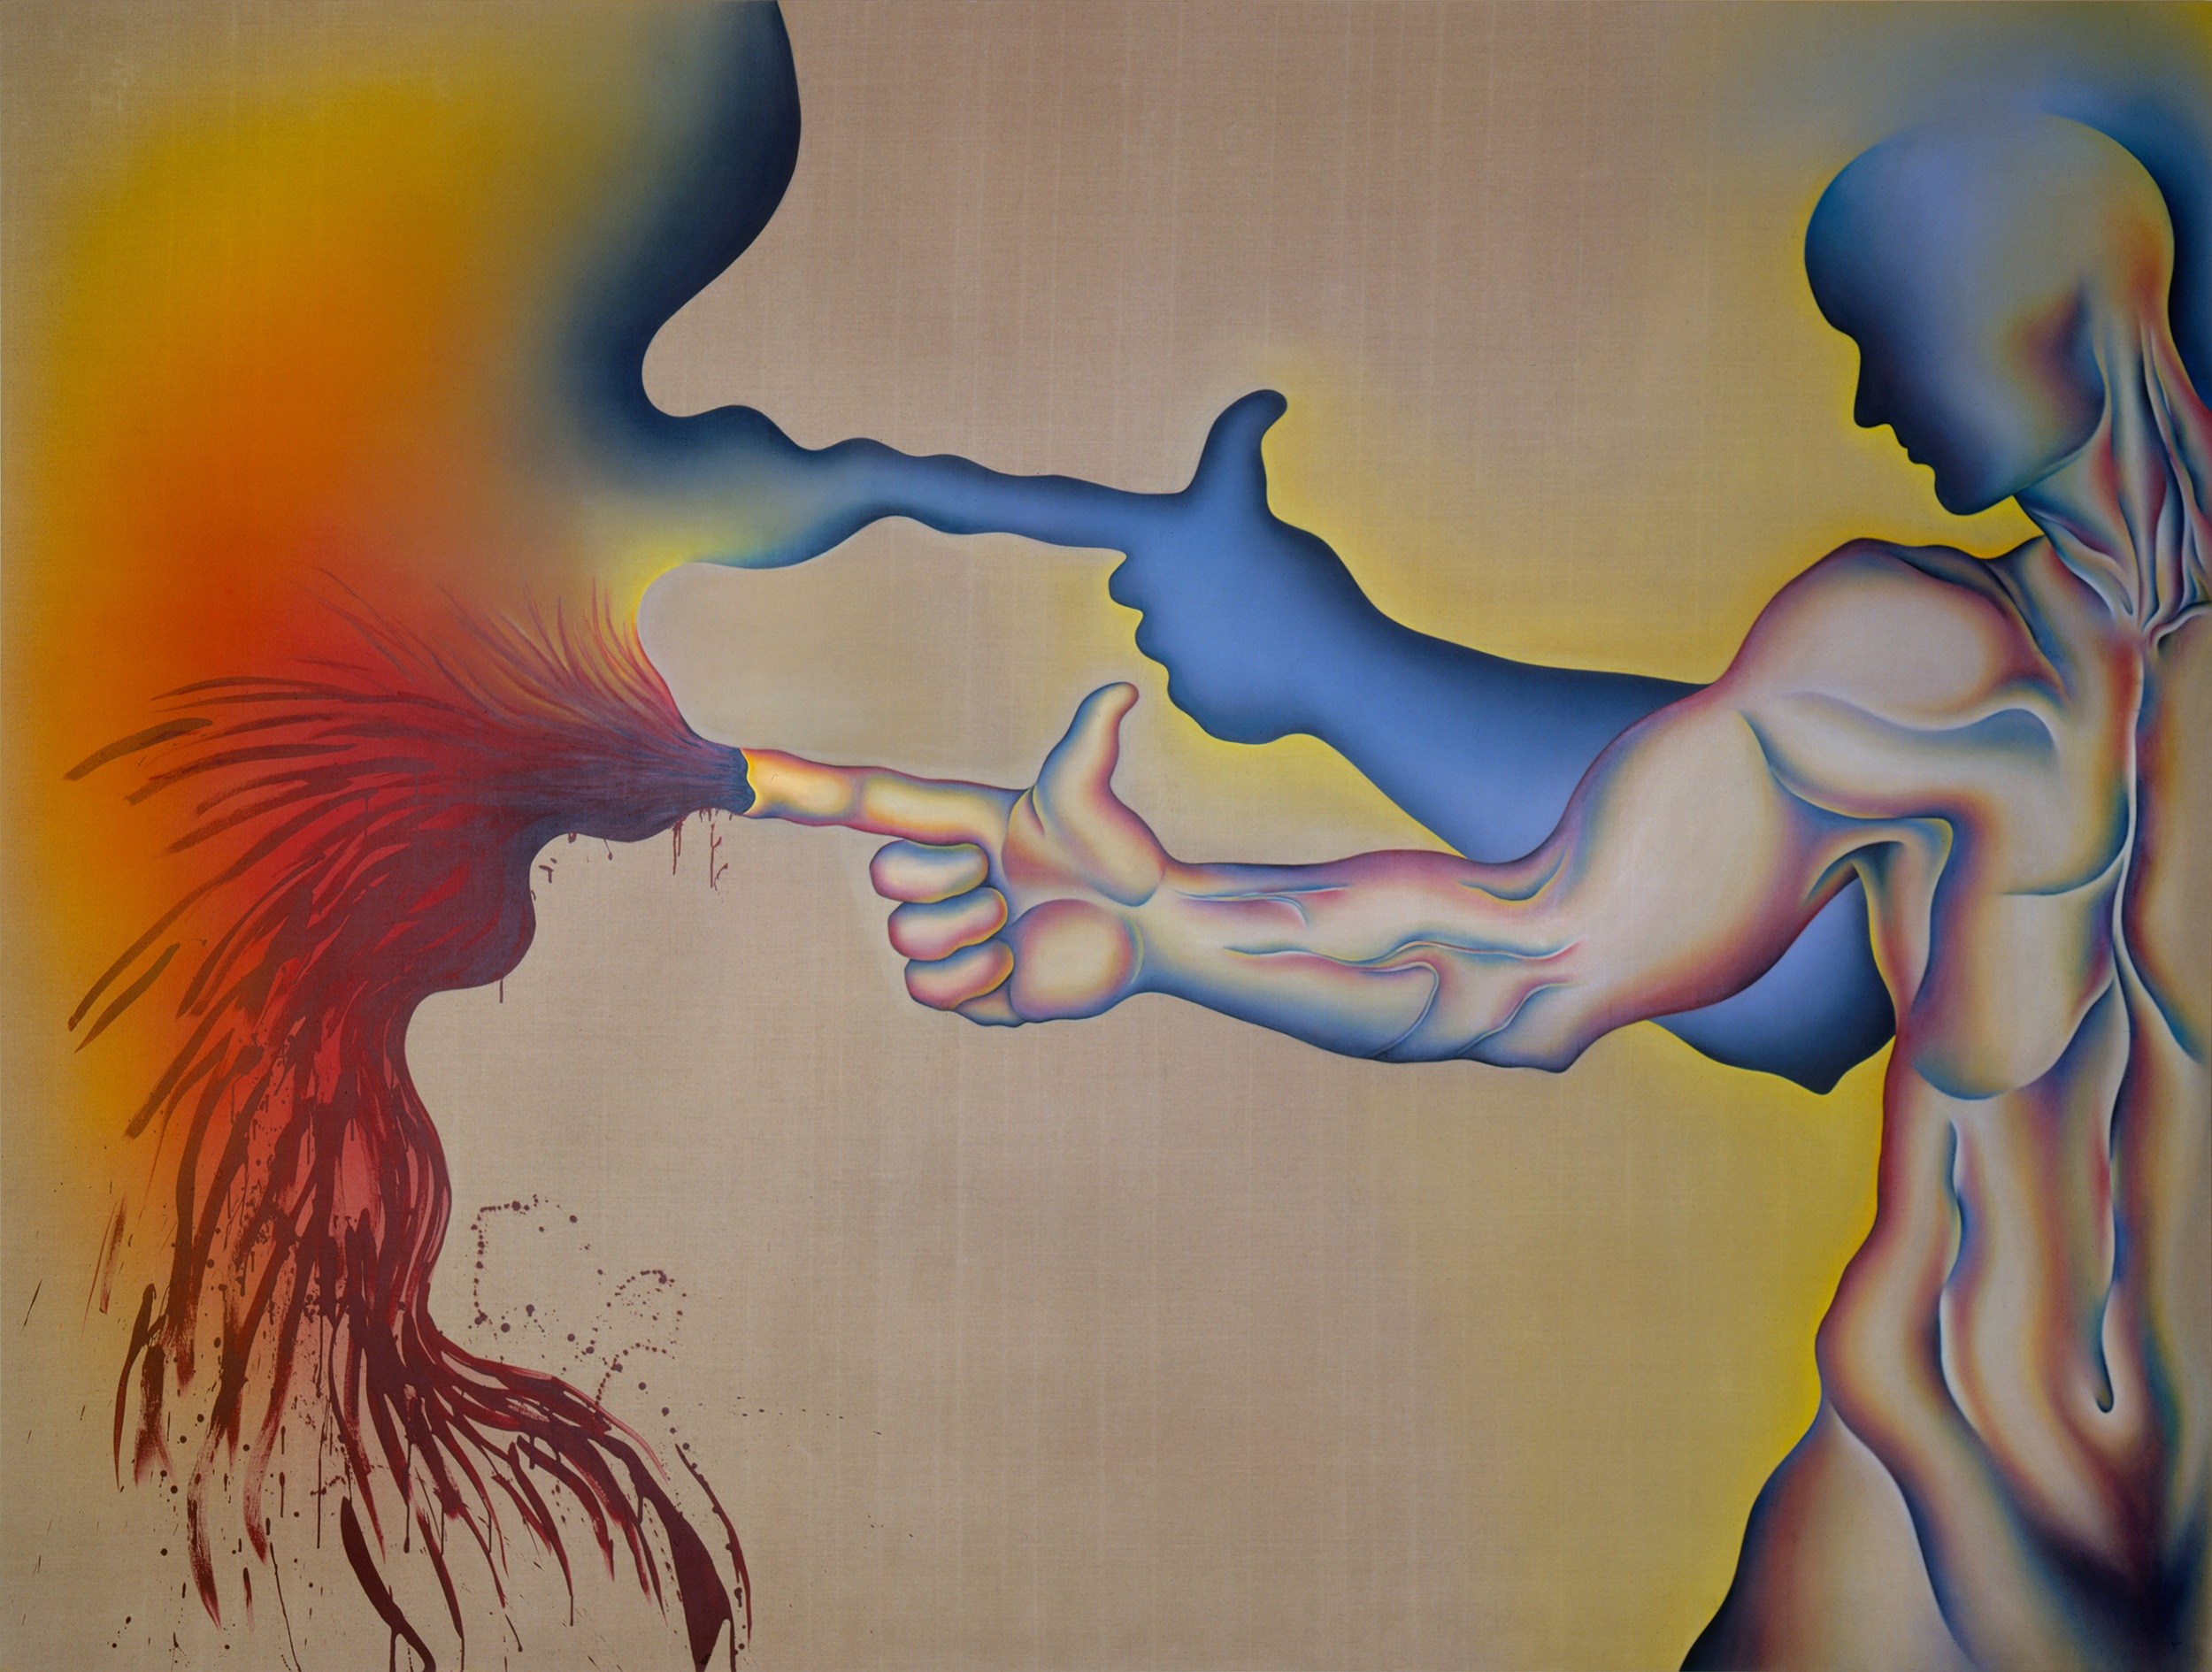 Painting of a nude androgynous figure shooting red liquid out of their right index finger. Behind their outstretched arm is a blue shadow.